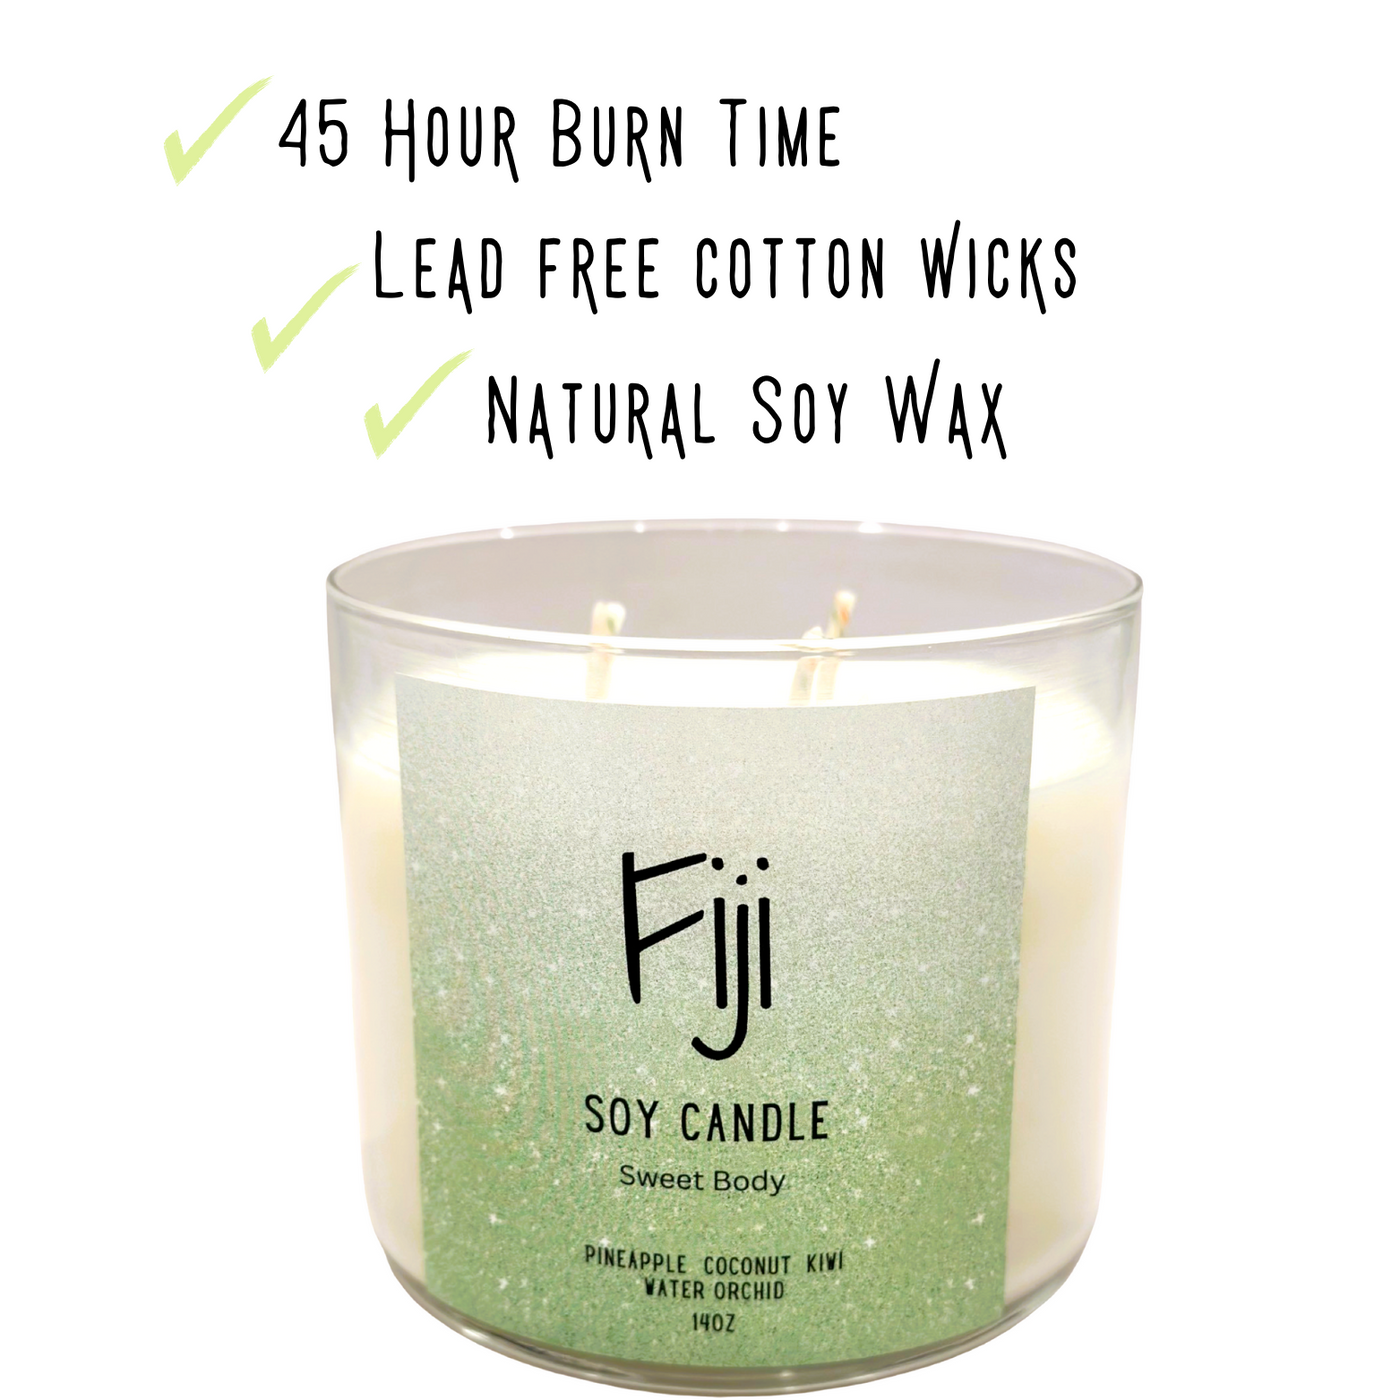 Fiji Soy Candle Floral Fruit Medley -Orchid, Green Coconut, Kiwi Blossom, Tahitian Vanilla, Pineapple, Frangipani & Amber Sweet Body 14oz (Free Candle Snuffer)